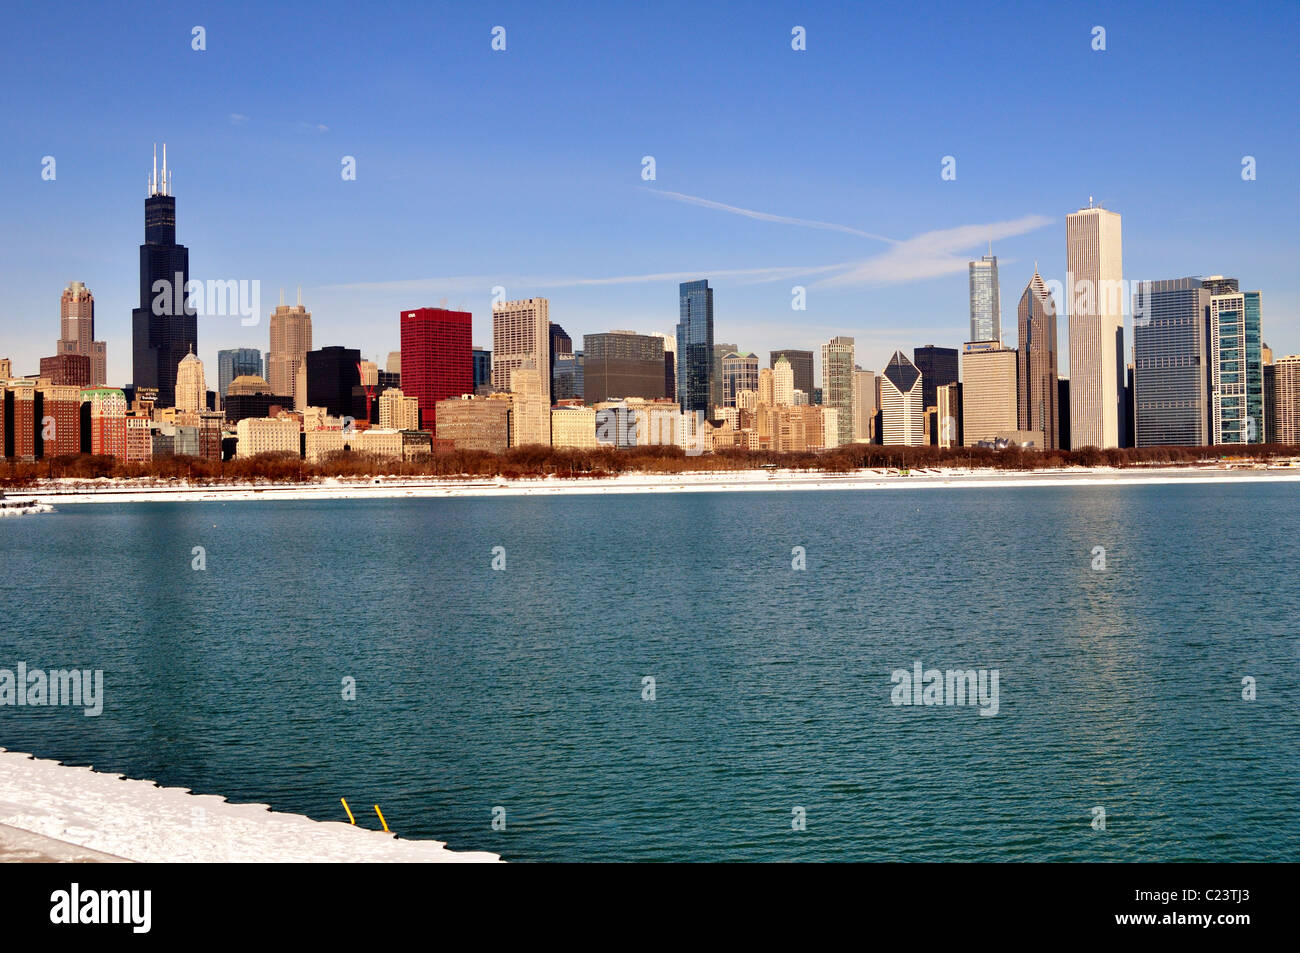 Winter skyline of Chicago showing lake front view.Chicago, Illinois, USA. Stock Photo